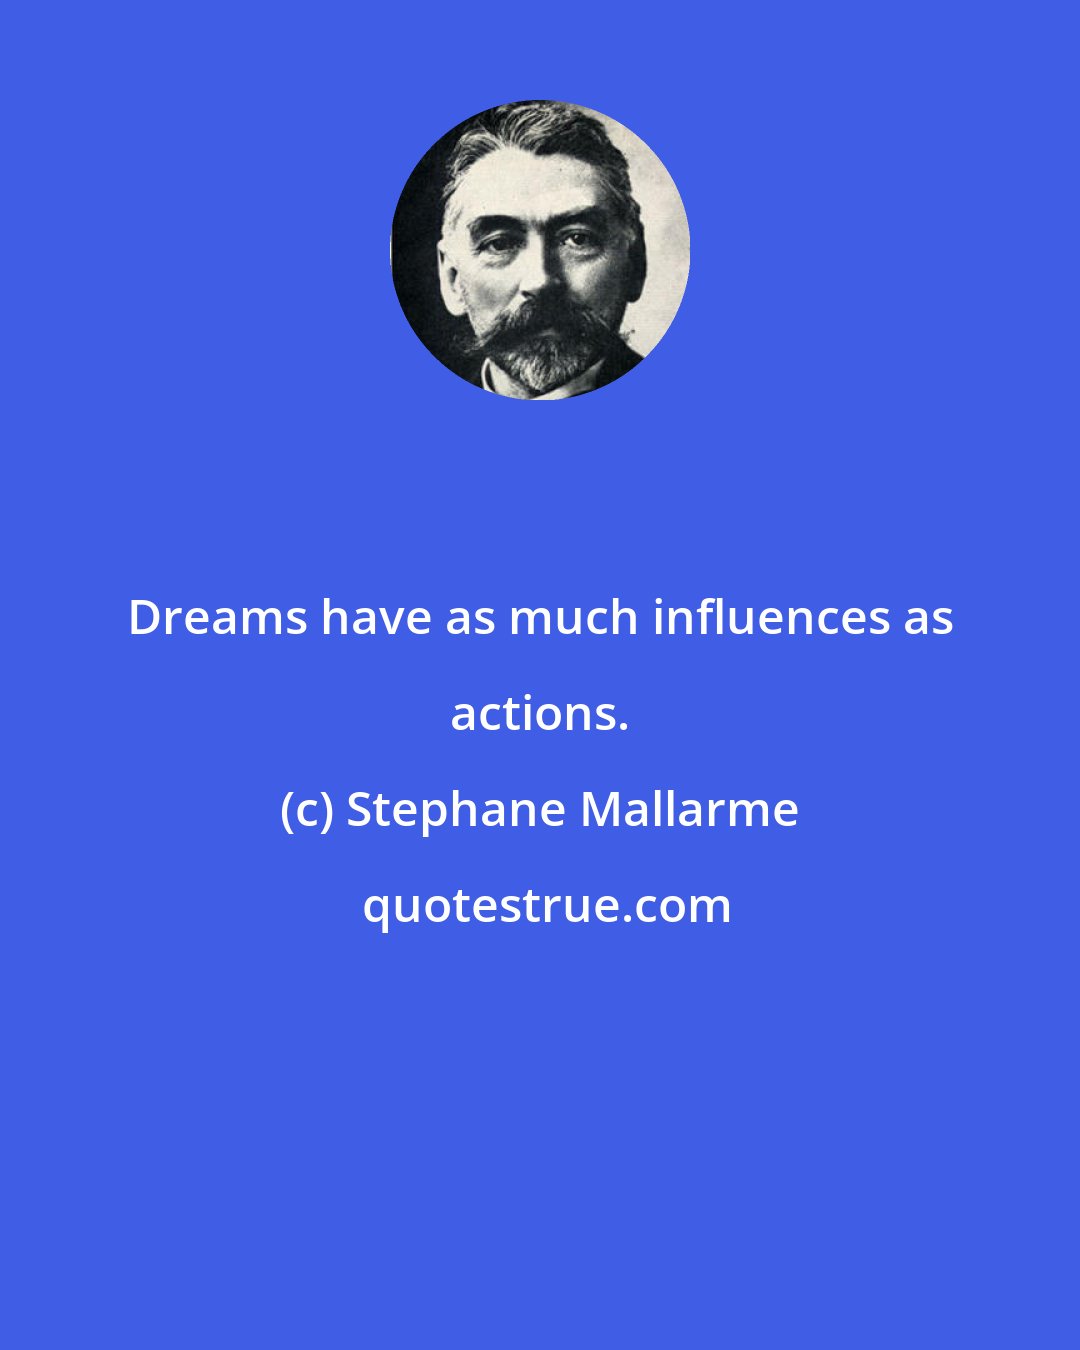 Stephane Mallarme: Dreams have as much influences as actions.